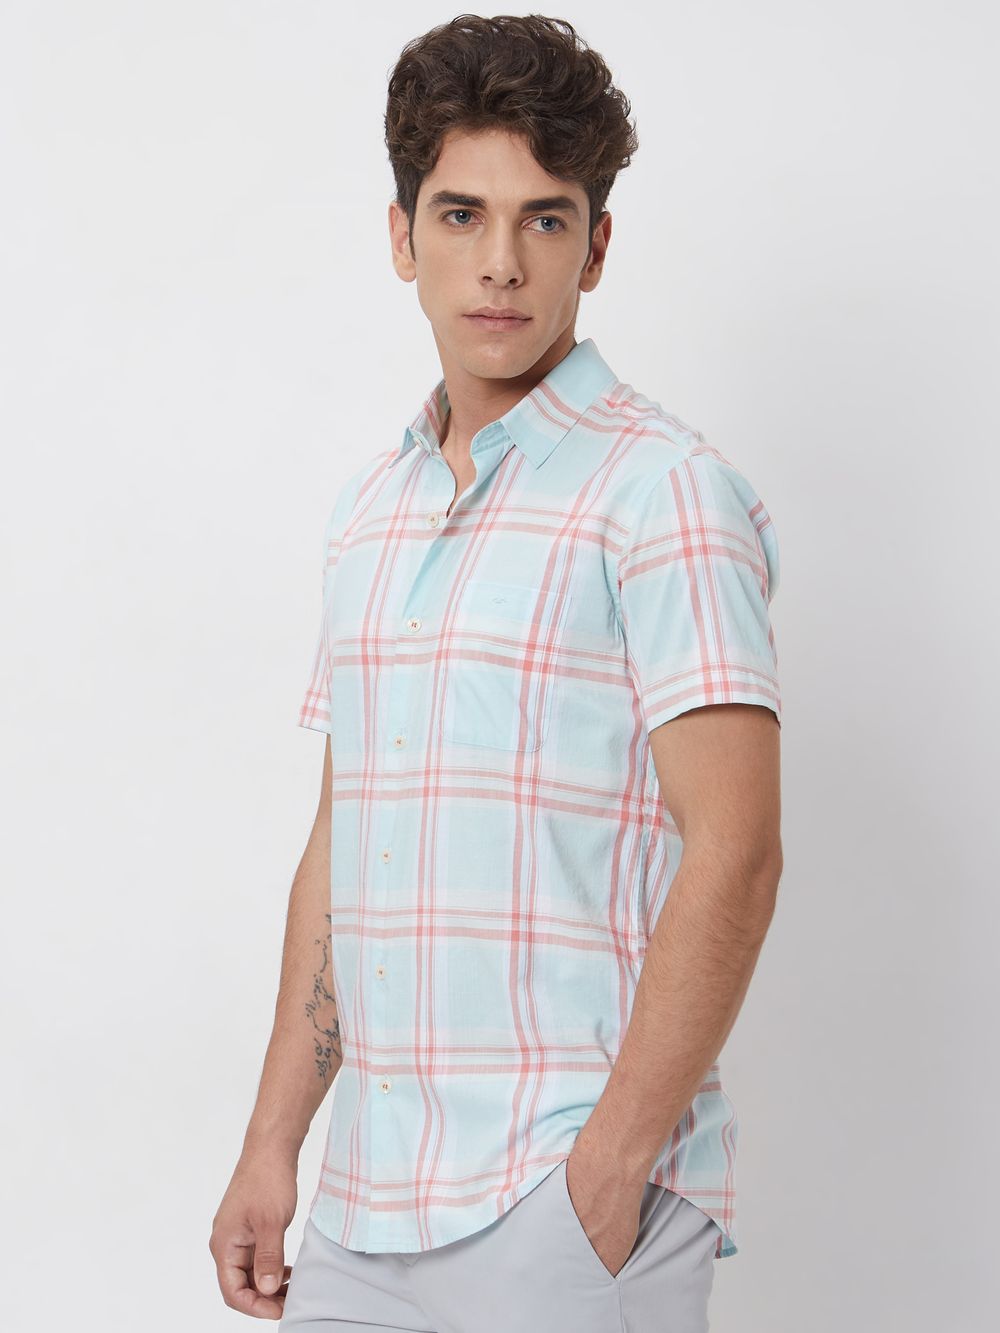 Turquoise Large Check Slim Fit Casual Shirt